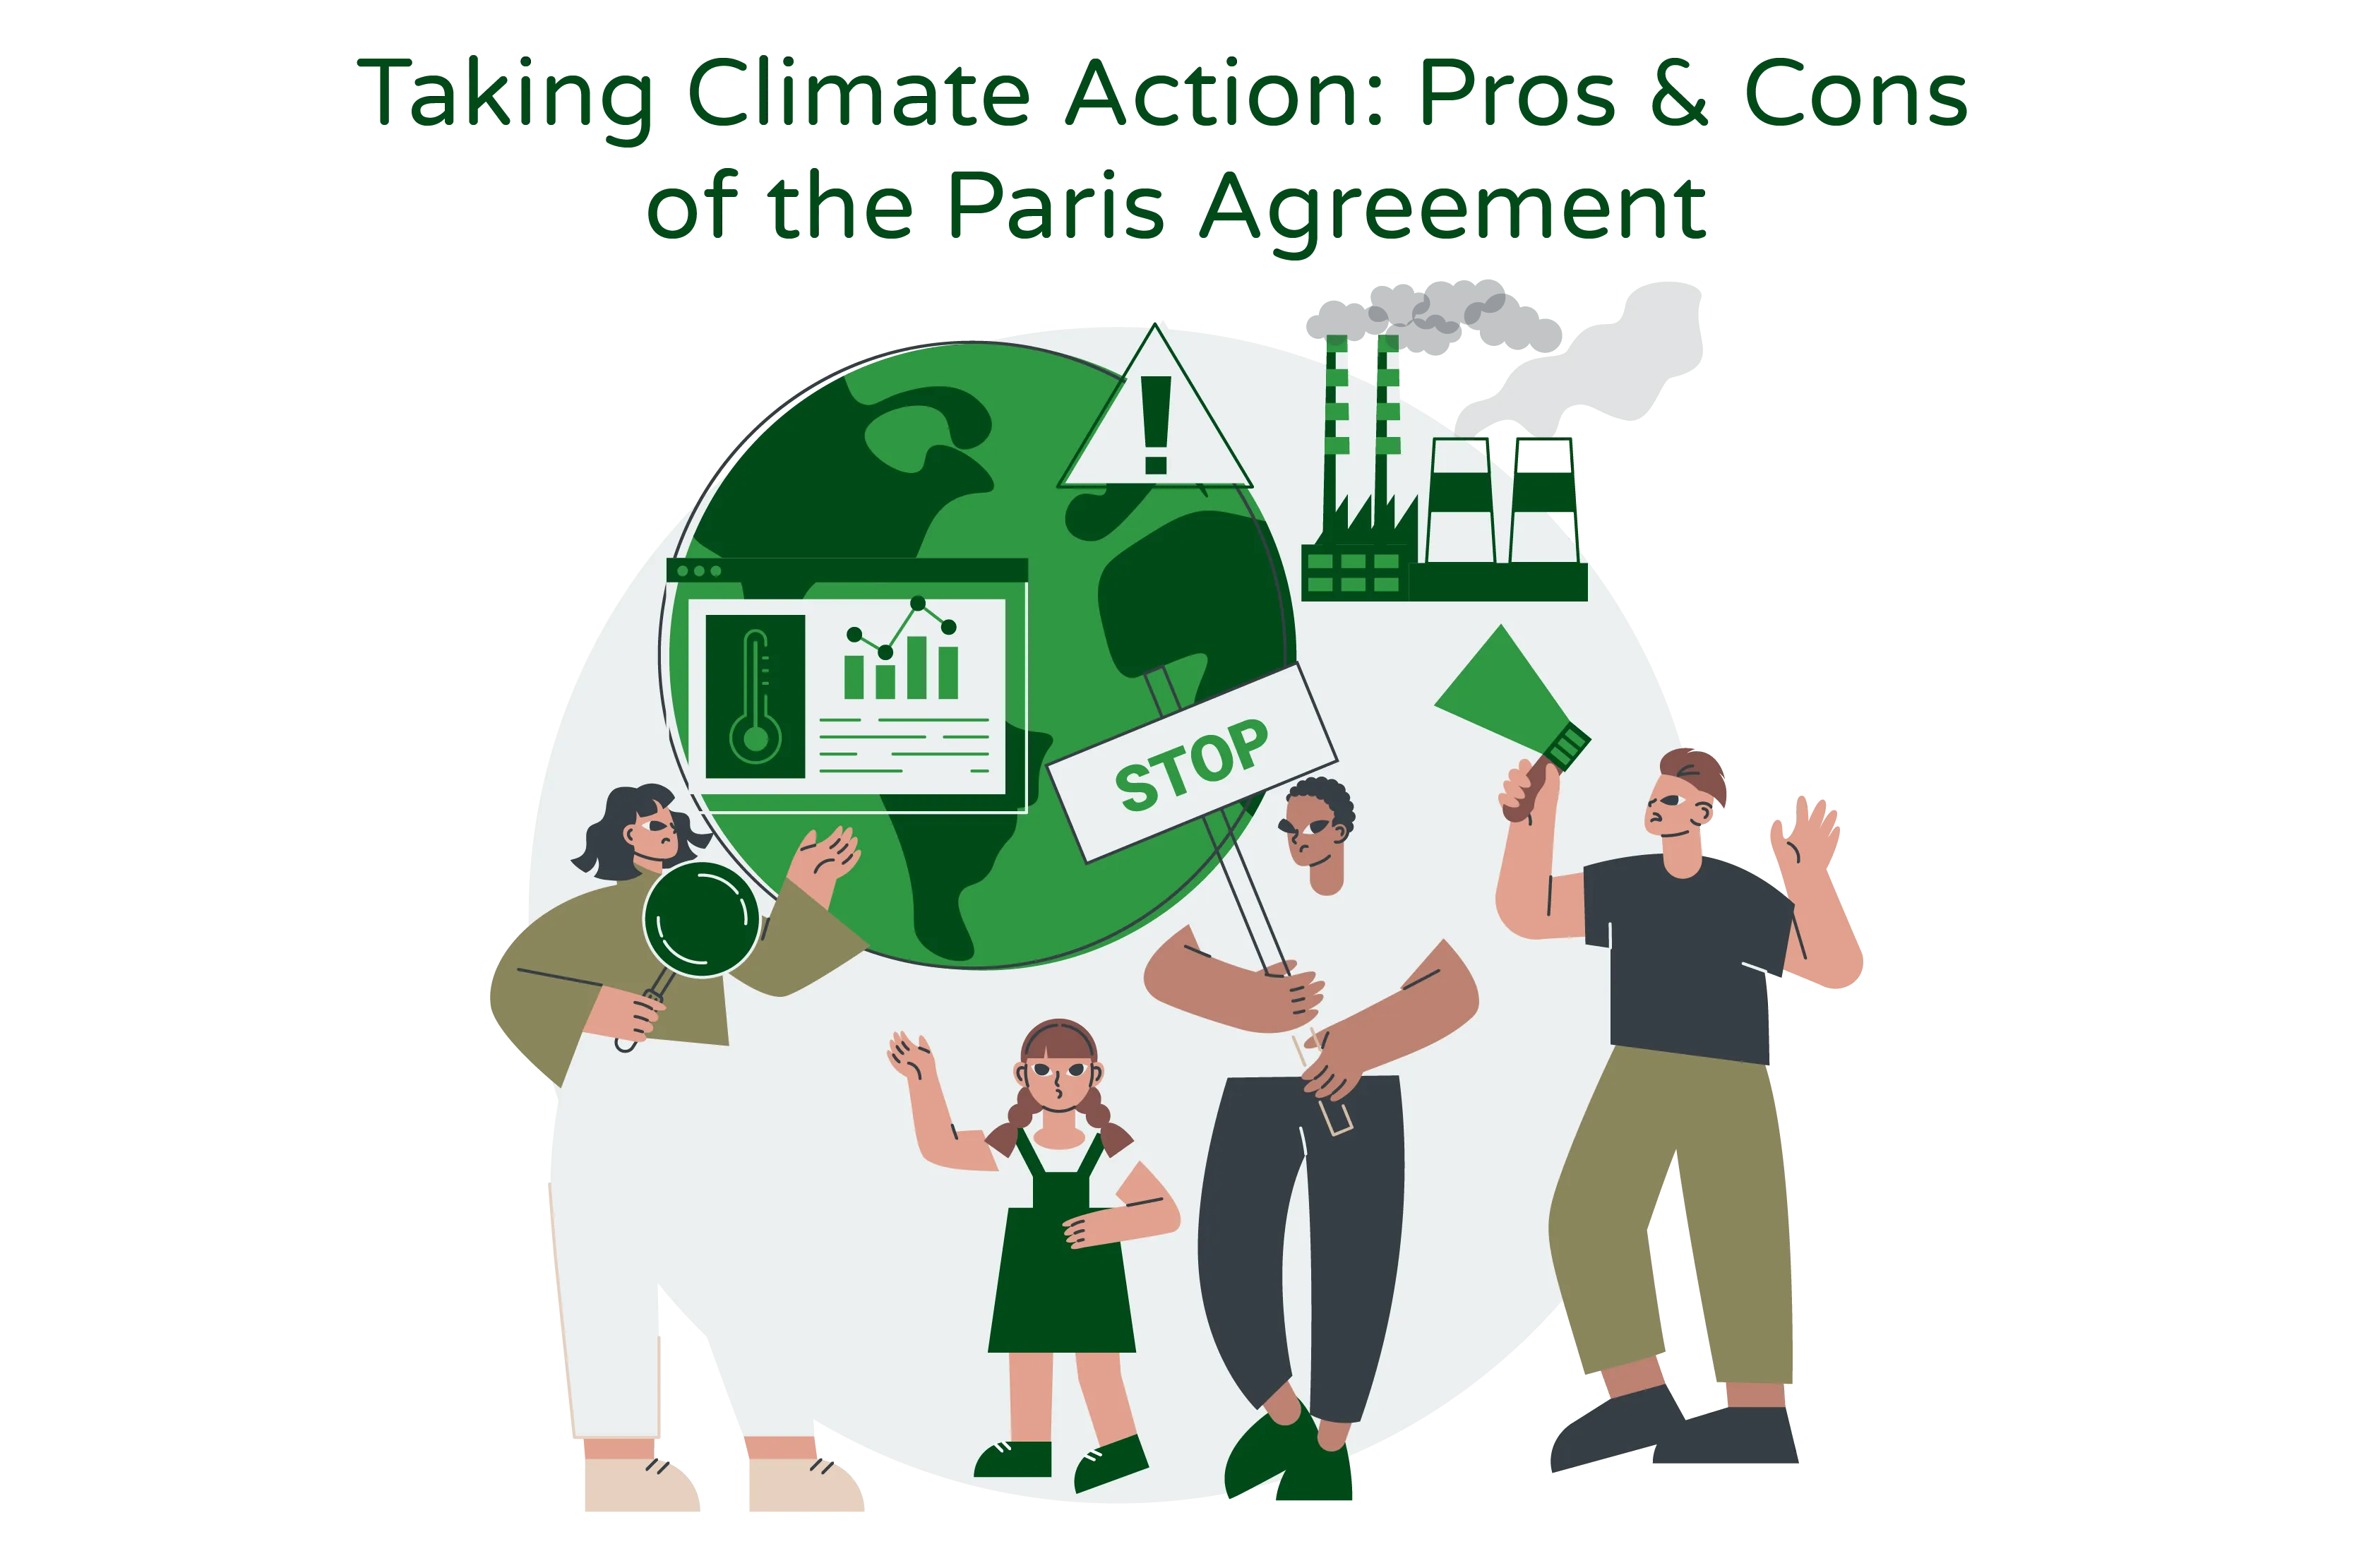 Illustration titled 'Taking Climate Action: Pros & Cons of the Paris Agreement.' The illustration depicts a group of individuals consisting of a child, a woman, and two men holding plank cards in their hands to symbolize their efforts to combat climate change. One of the men is shown holding a speaker, representing advocacy and raising awareness.  On one side of the illustration, there is a globe, representing the Earth. Towards the top left of the globe, an industrial facility is depicted emitting smoke, symbolizing pollution and greenhouse gas emissions.  The illustration conveys the idea of the pros and cons associated with the Paris Agreement, a global initiative to address climate change. It showcases the positive aspects of collective action and raising awareness, while also acknowledging the challenges posed by industrial activities and environmental pollution.  Overall, the illustration visualizes the ongoing efforts to mitigate climate change, presenting a balanced view of the advantages and disadvantages associated with the Paris Agreement.